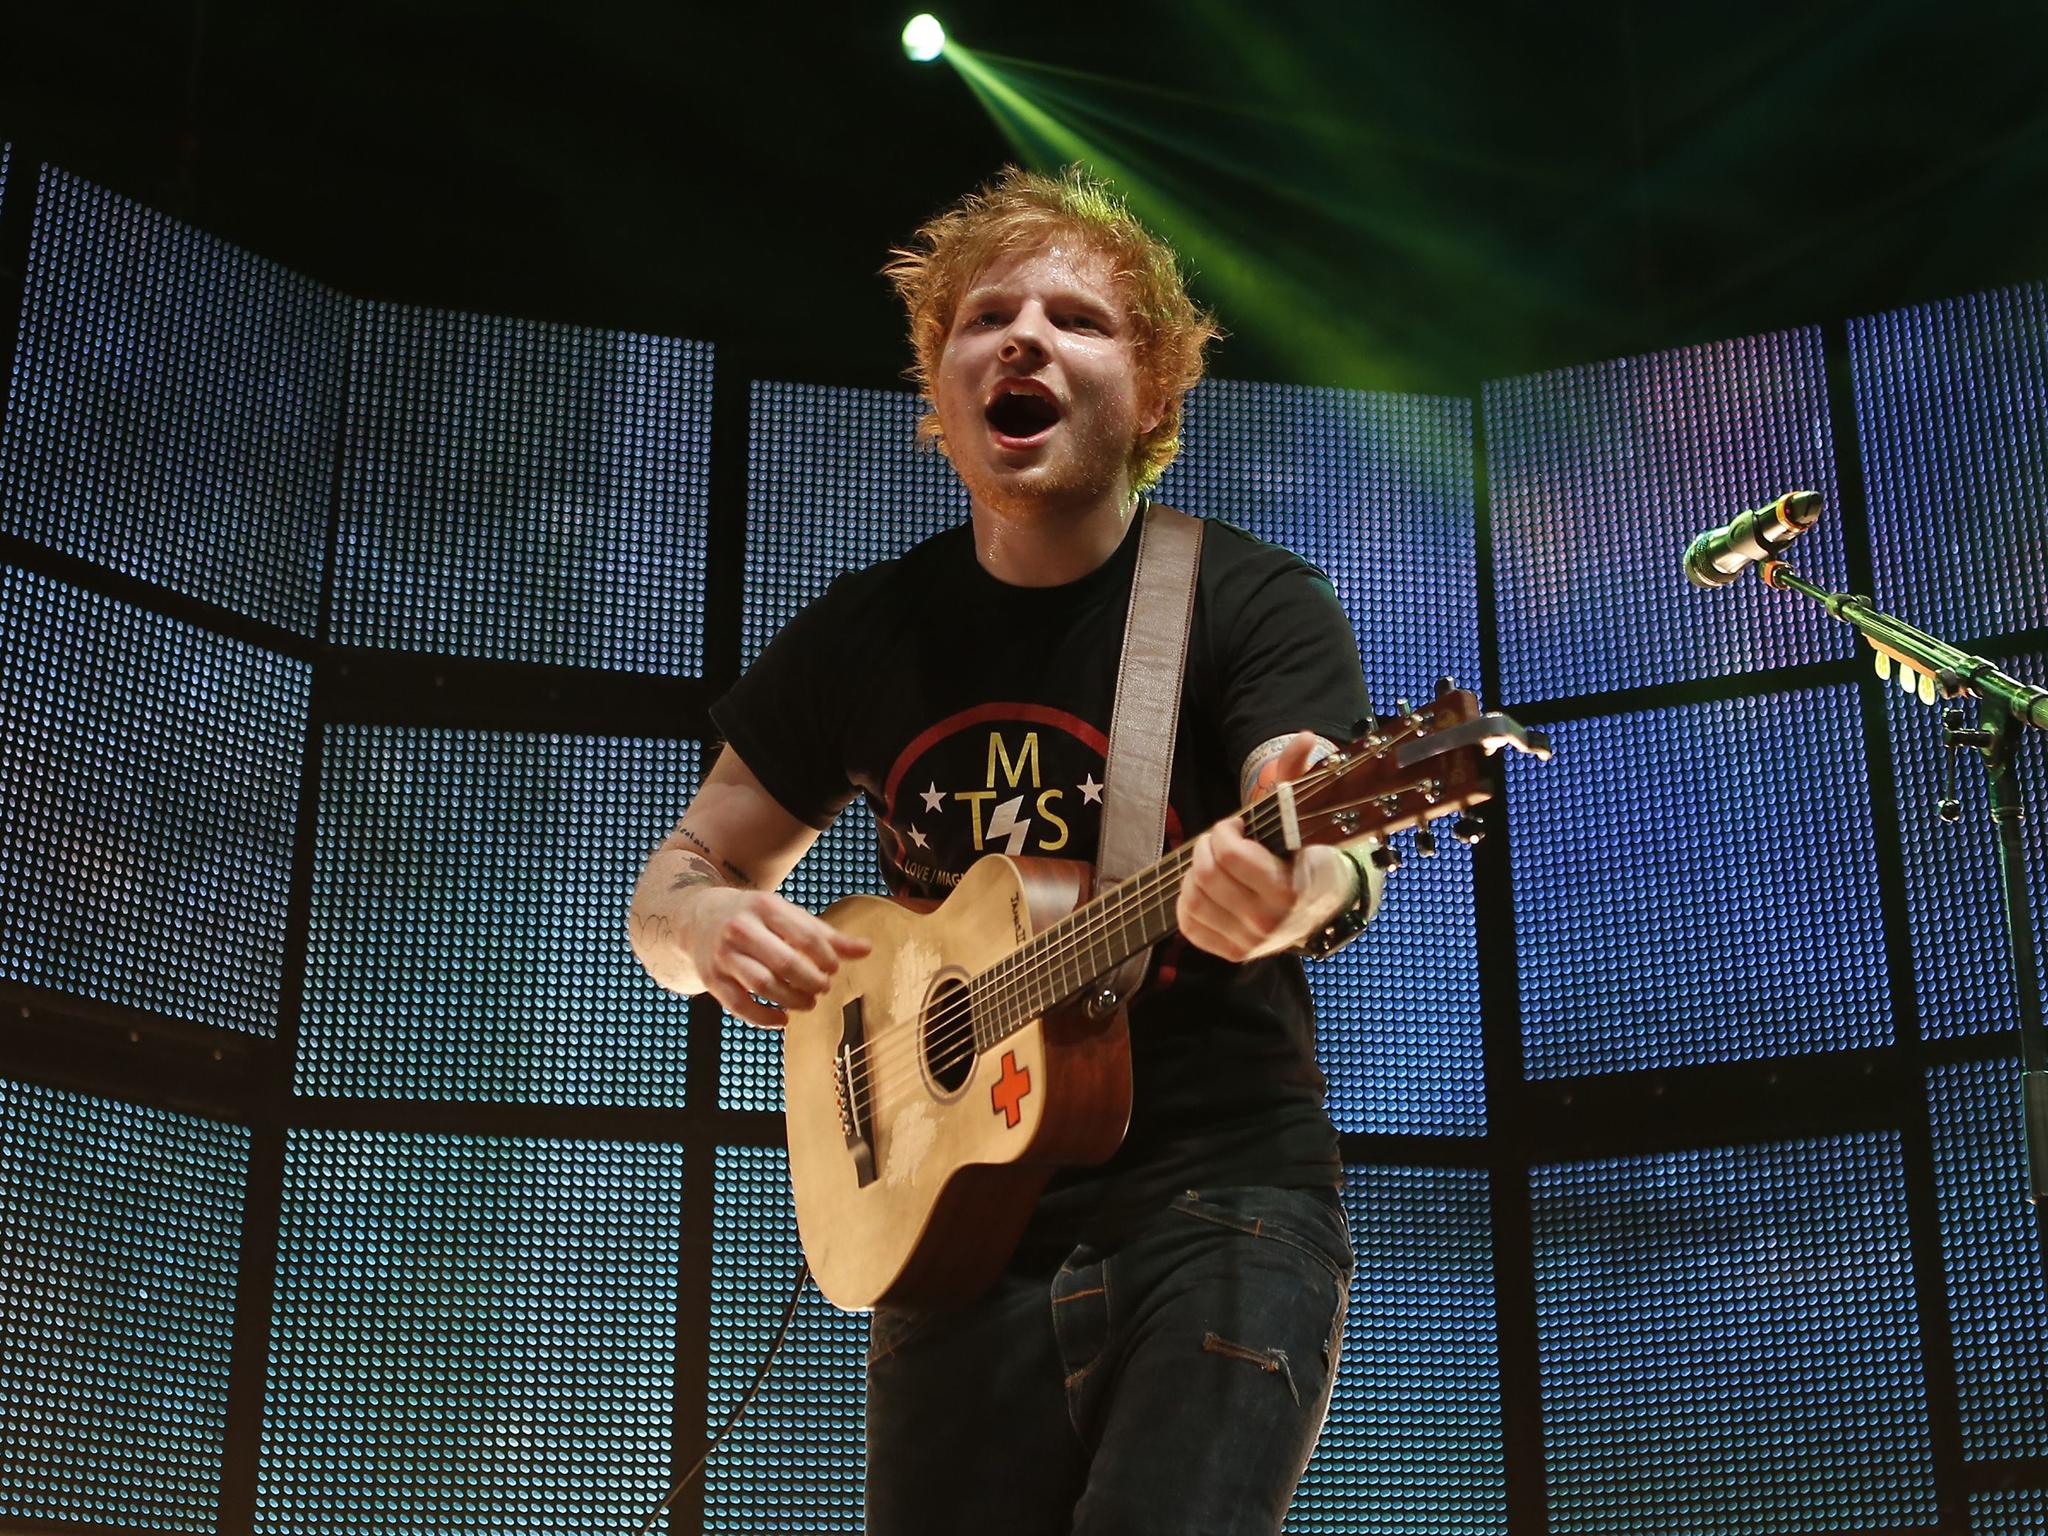 With his tatty T-shirts and high-street jeans, Sheeran has pioneered the lad-from-up-the-road look (Rex)